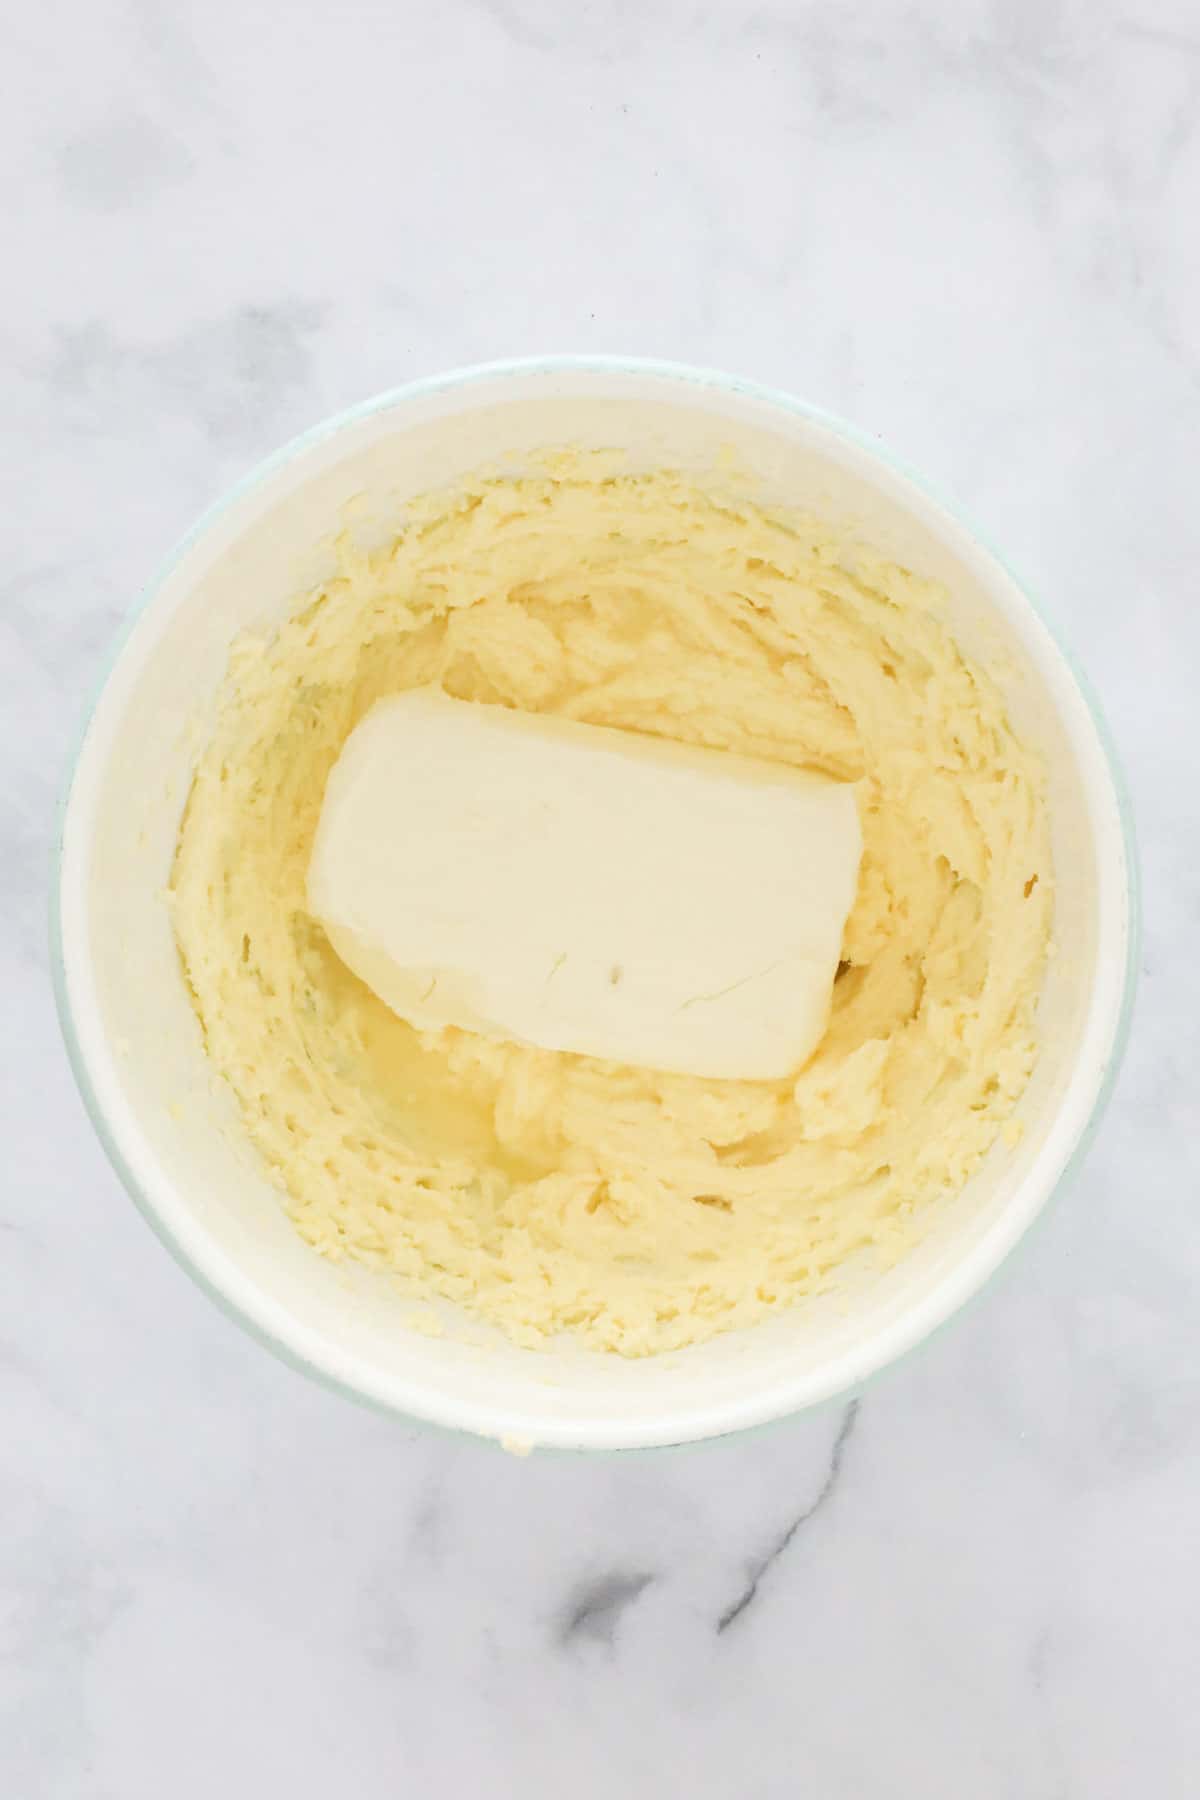 A block of cream cheese added to the mixing bowl.